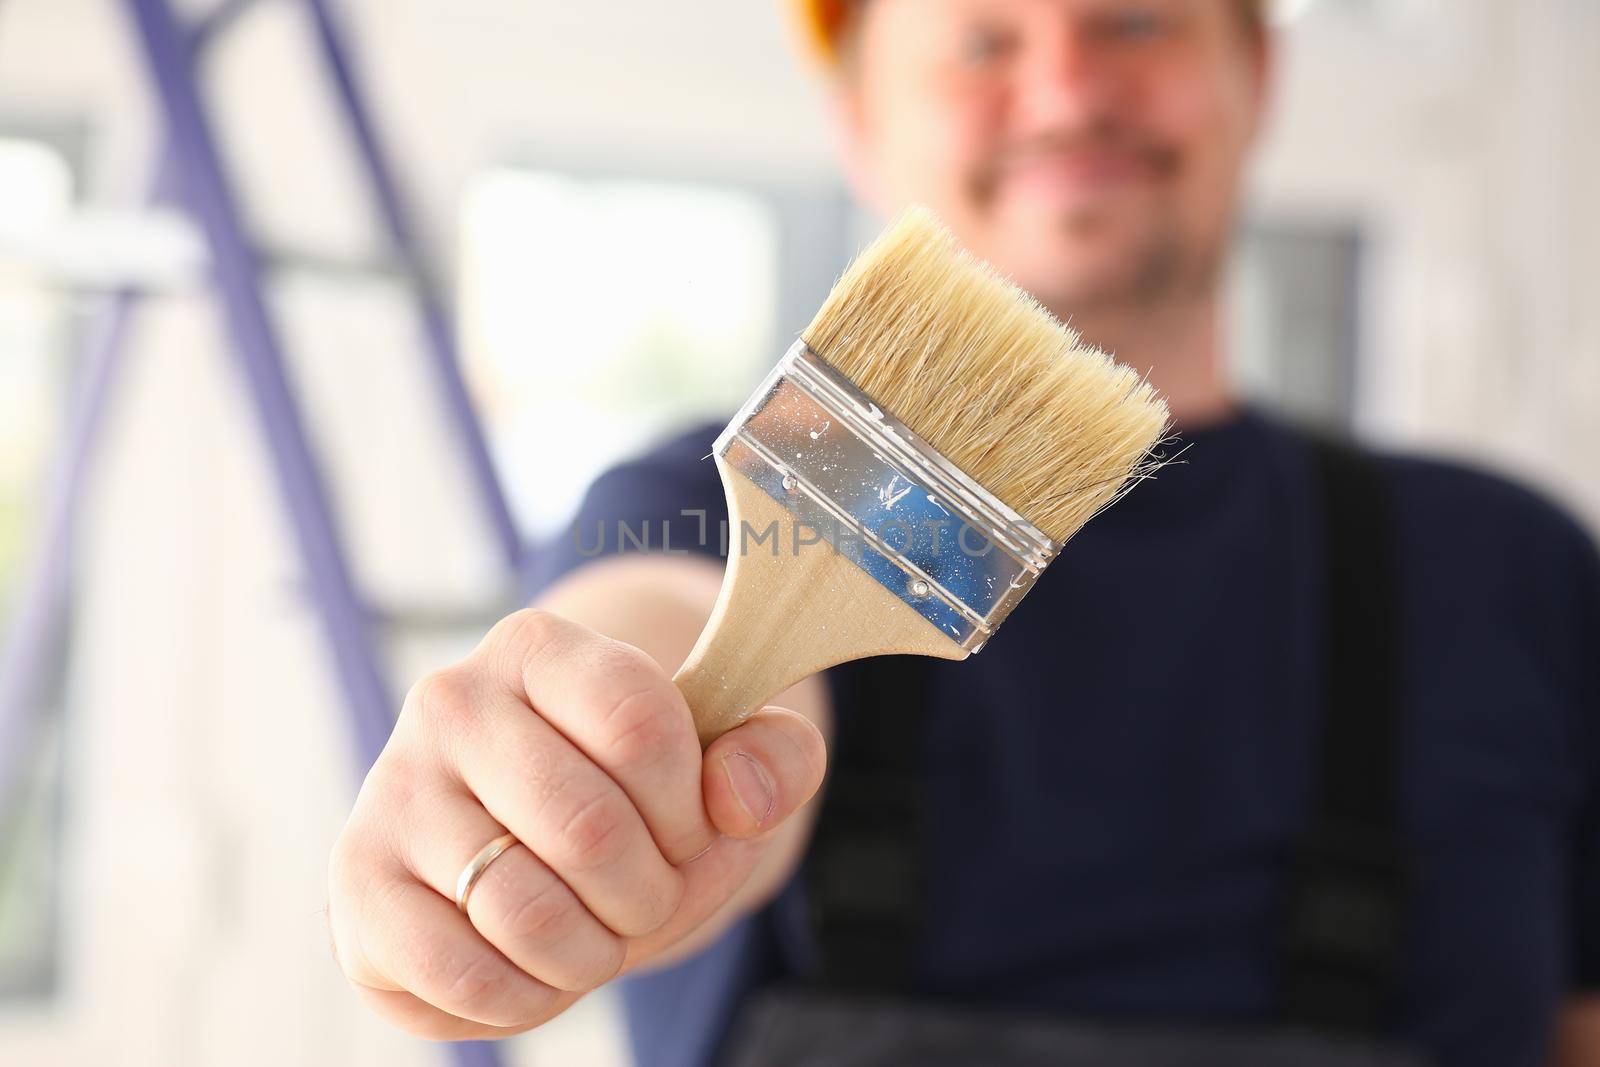 Arm of smiling worker hold brush closeup. Manual job workplace DIY inspiration improvement fix shop yellow helmet hard hat joinery startup idea industrial education profession career concept